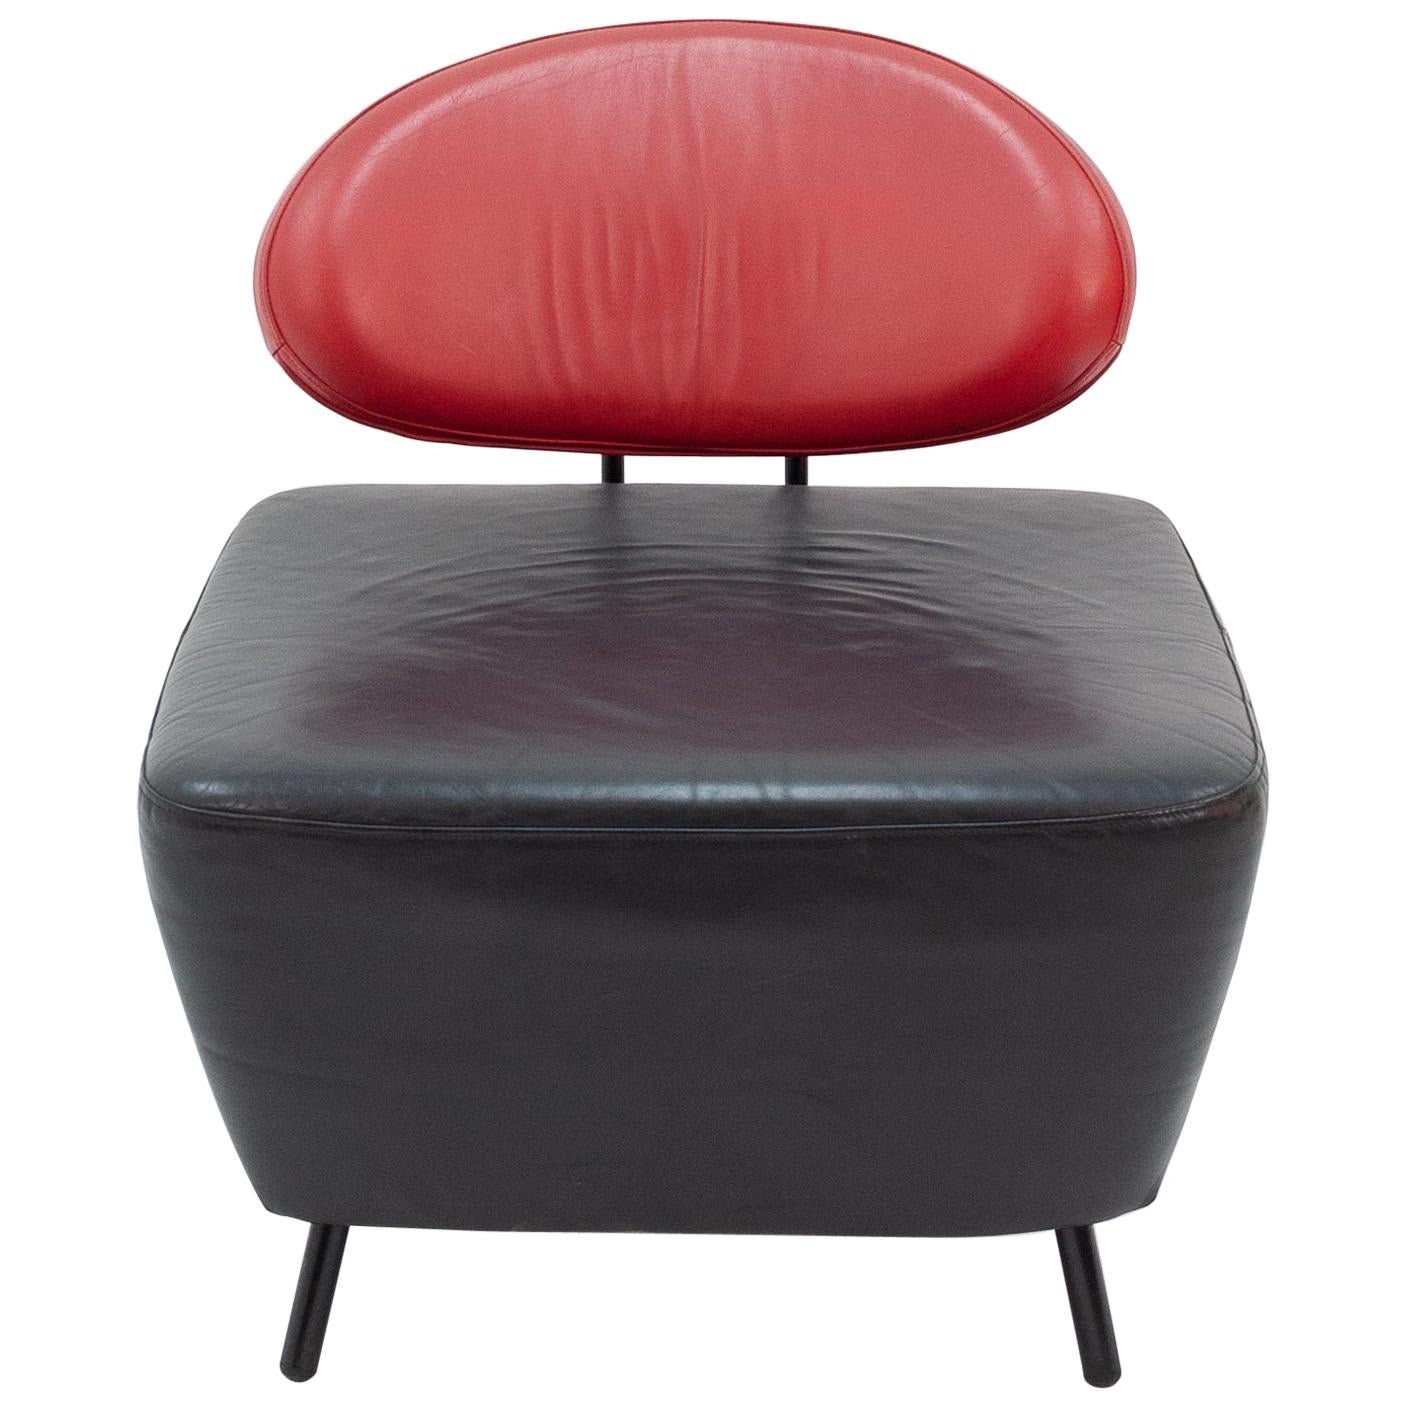 Black on Red Leather Lounge Chair by Staccato Van IQ for Multifoam